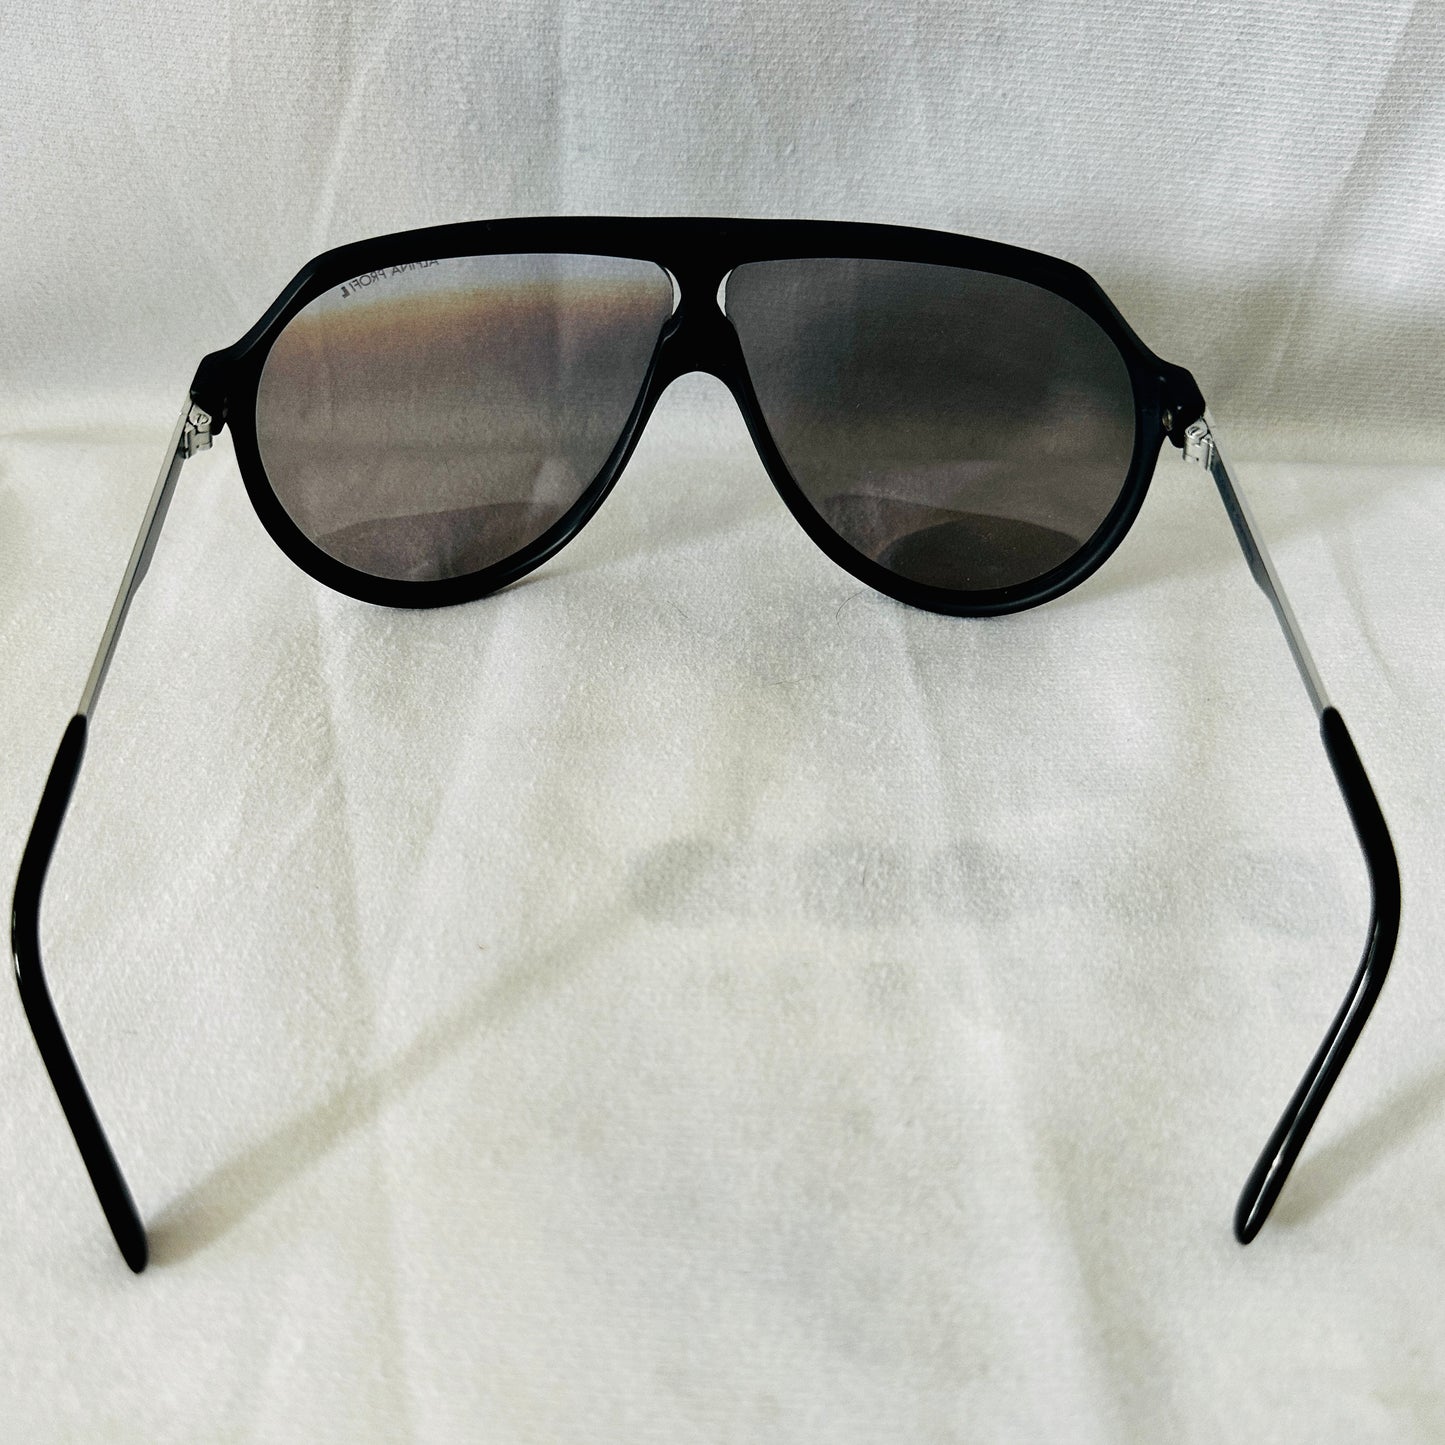 Alpina 80s Vintage Sunglasses - Made in West Germany